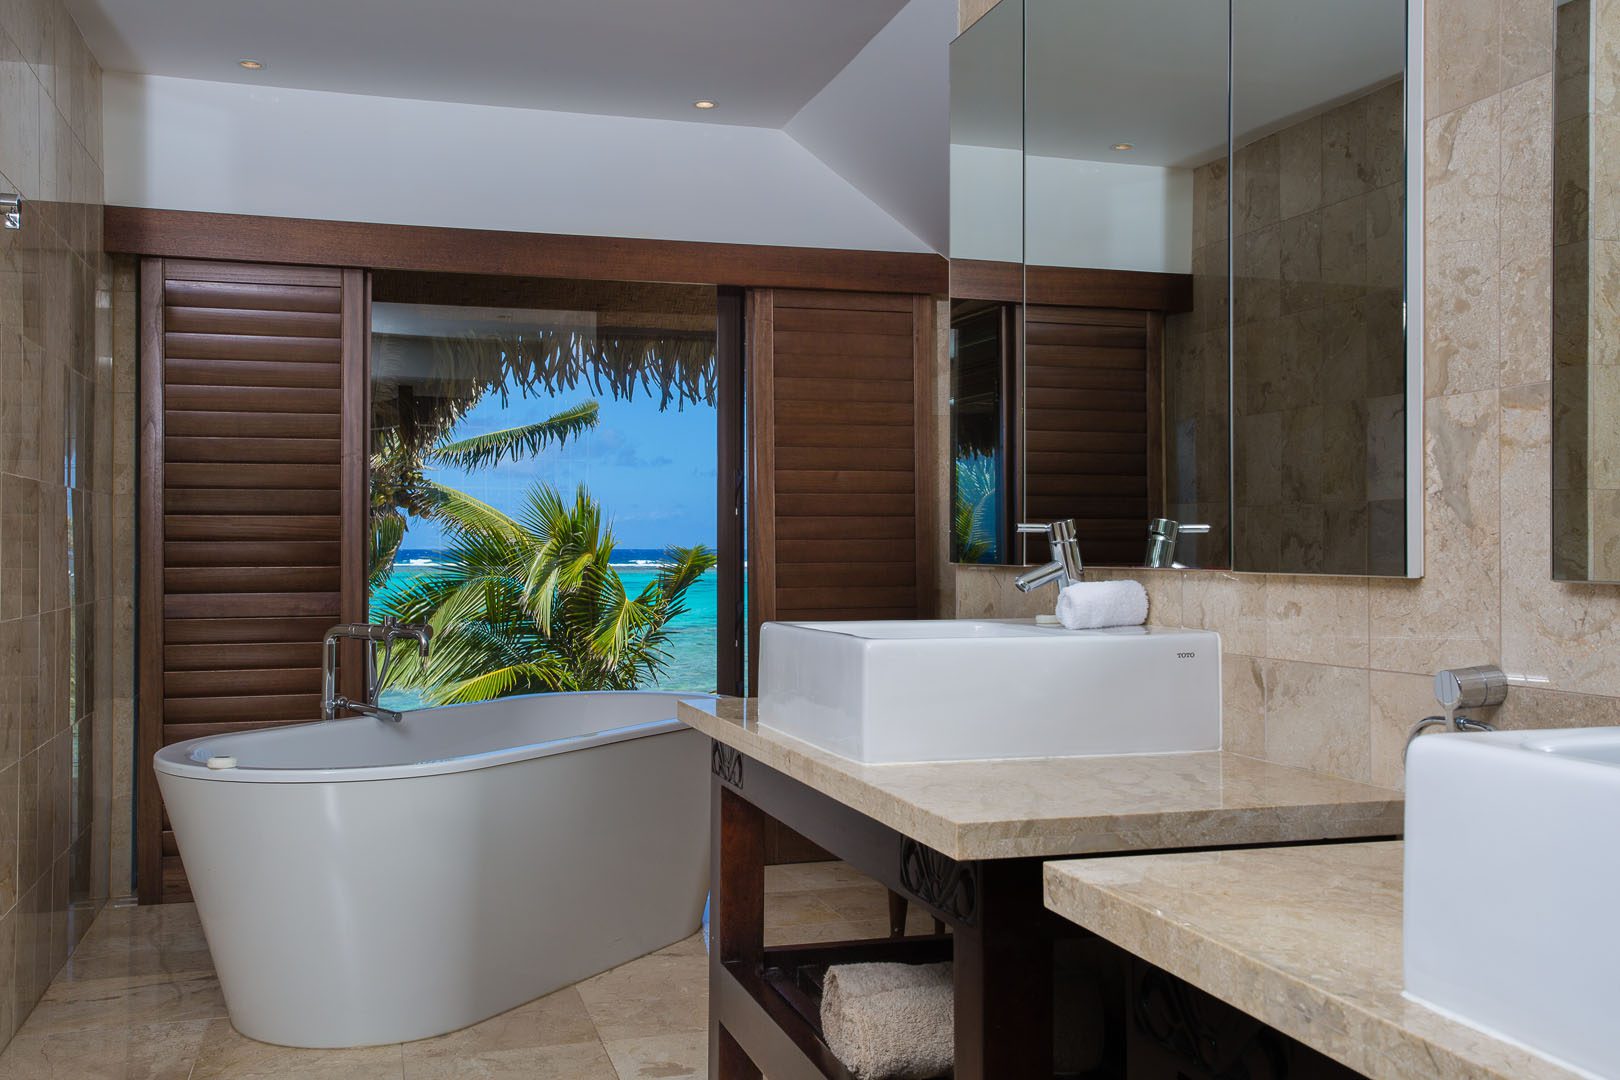 View of the modern Presidential Beachfront Villa Bathroom, with a large bath overlooking a view of the blue lagoon